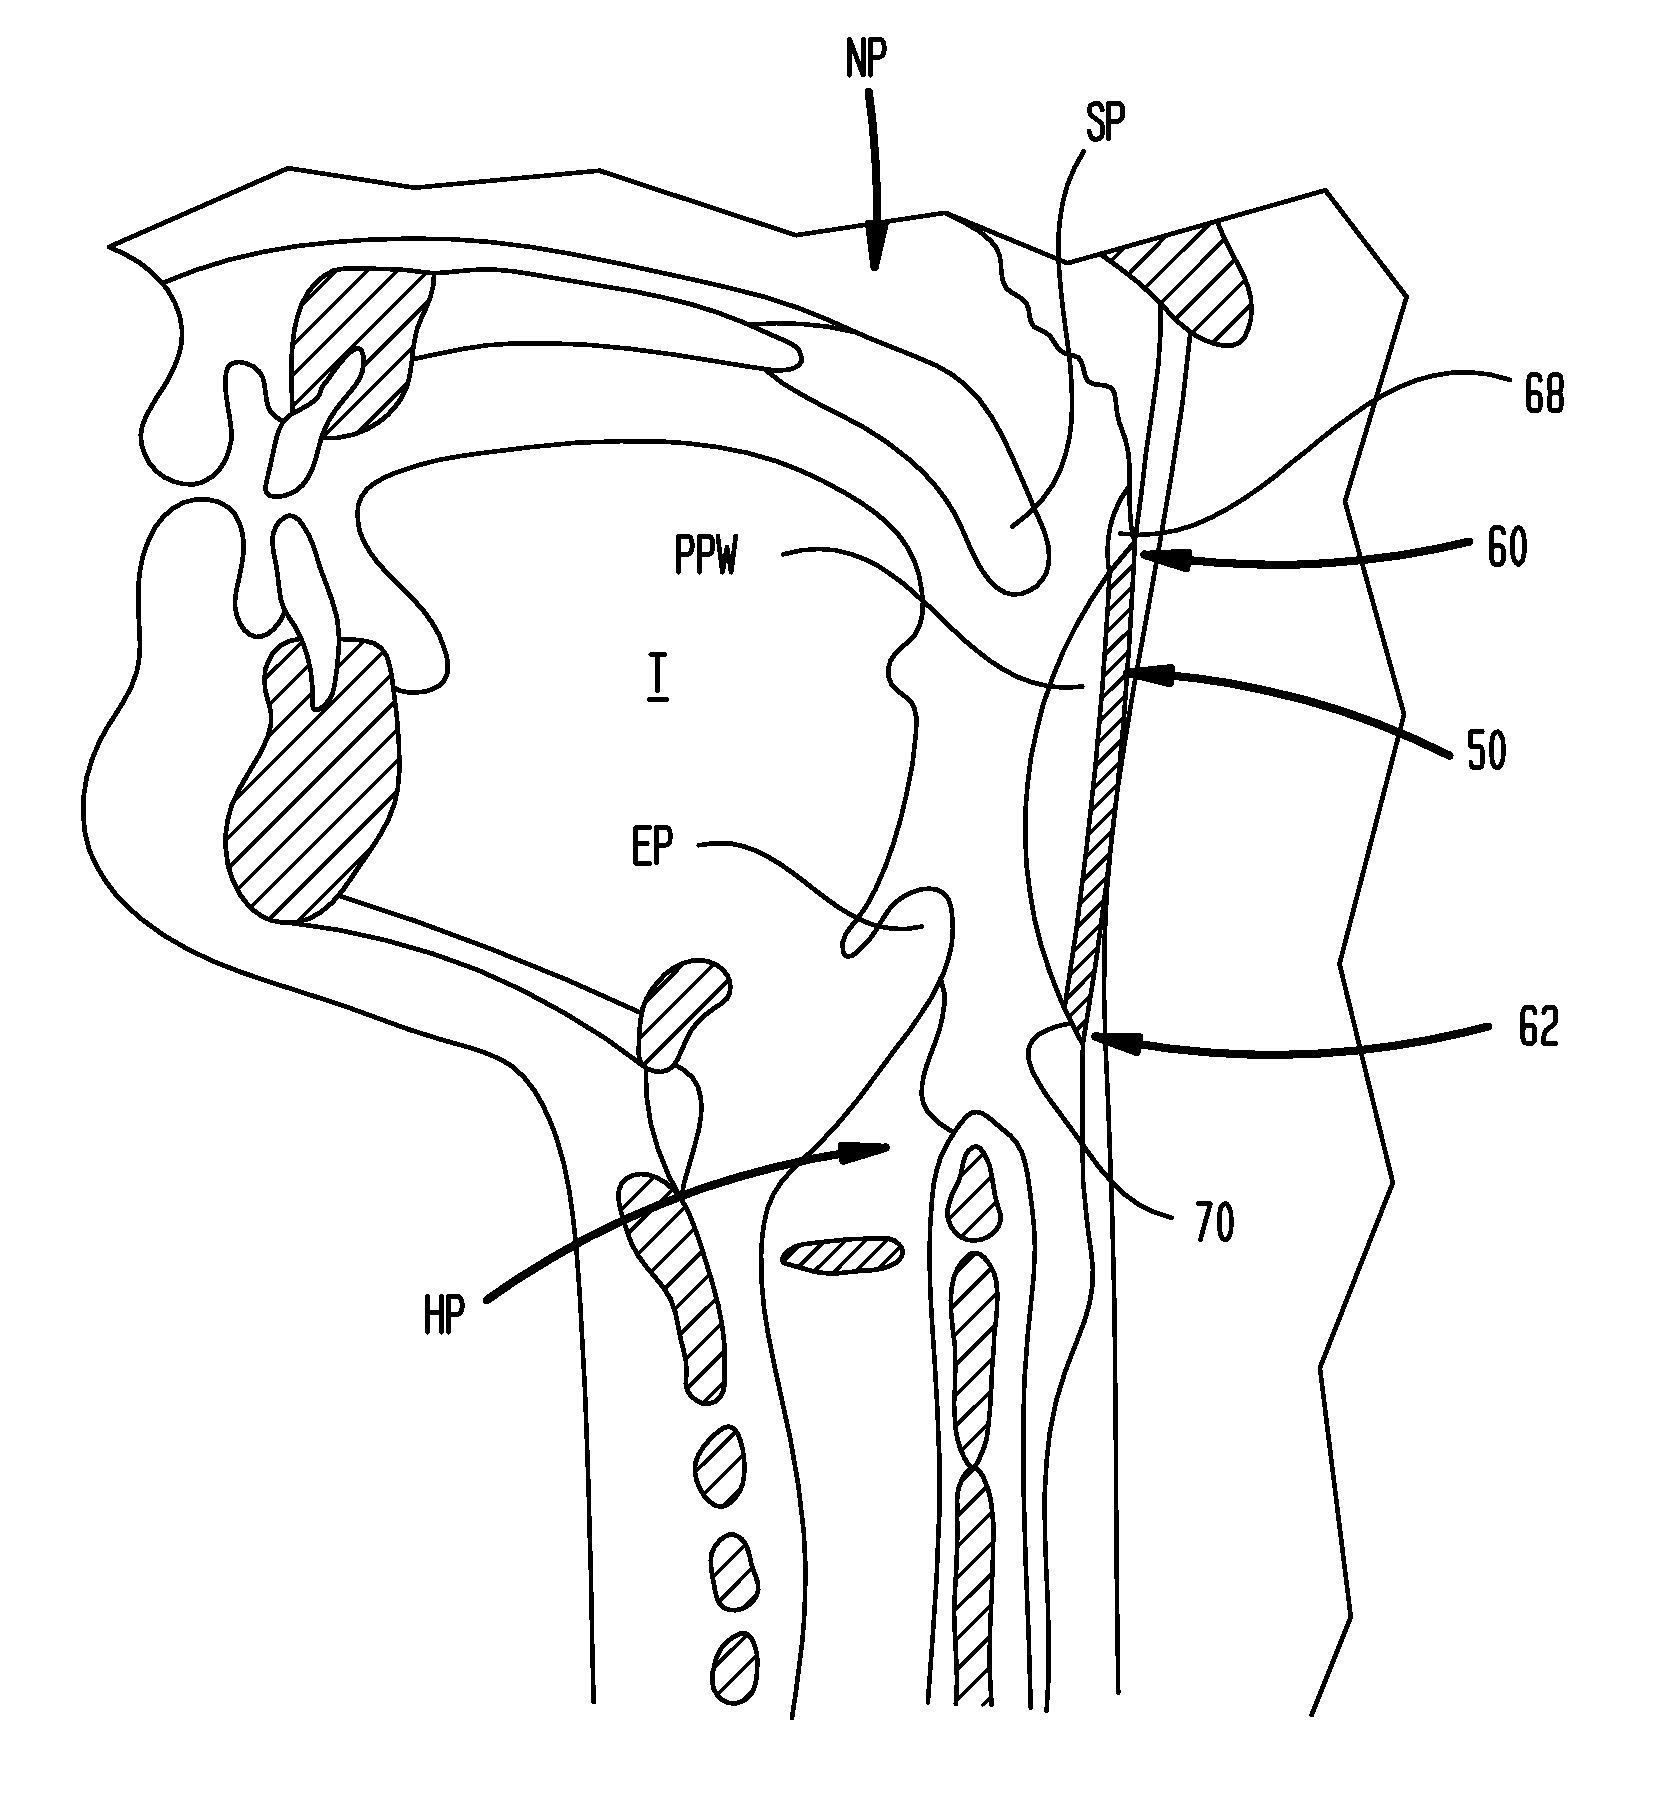 Methods and devices for forming an auxiliary airway for treating obstructive sleep apnea